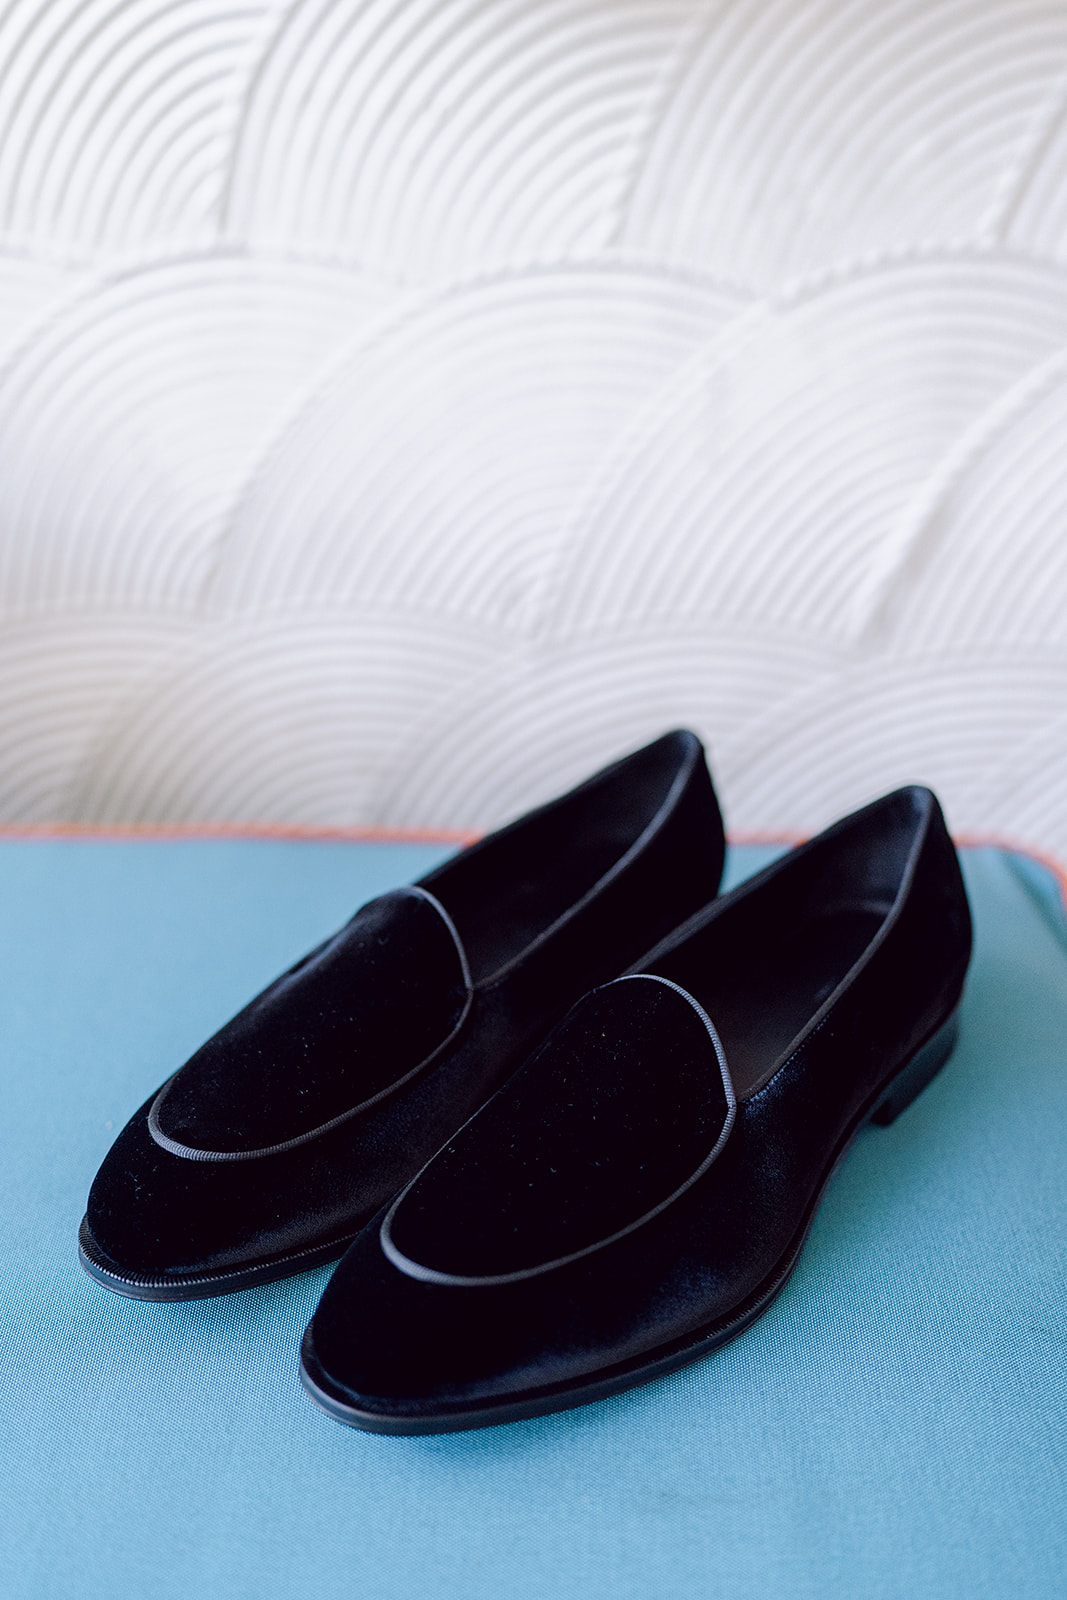 Groom's blue loafers at Mayfair House Hotel & Garden in Miami on wedding day.